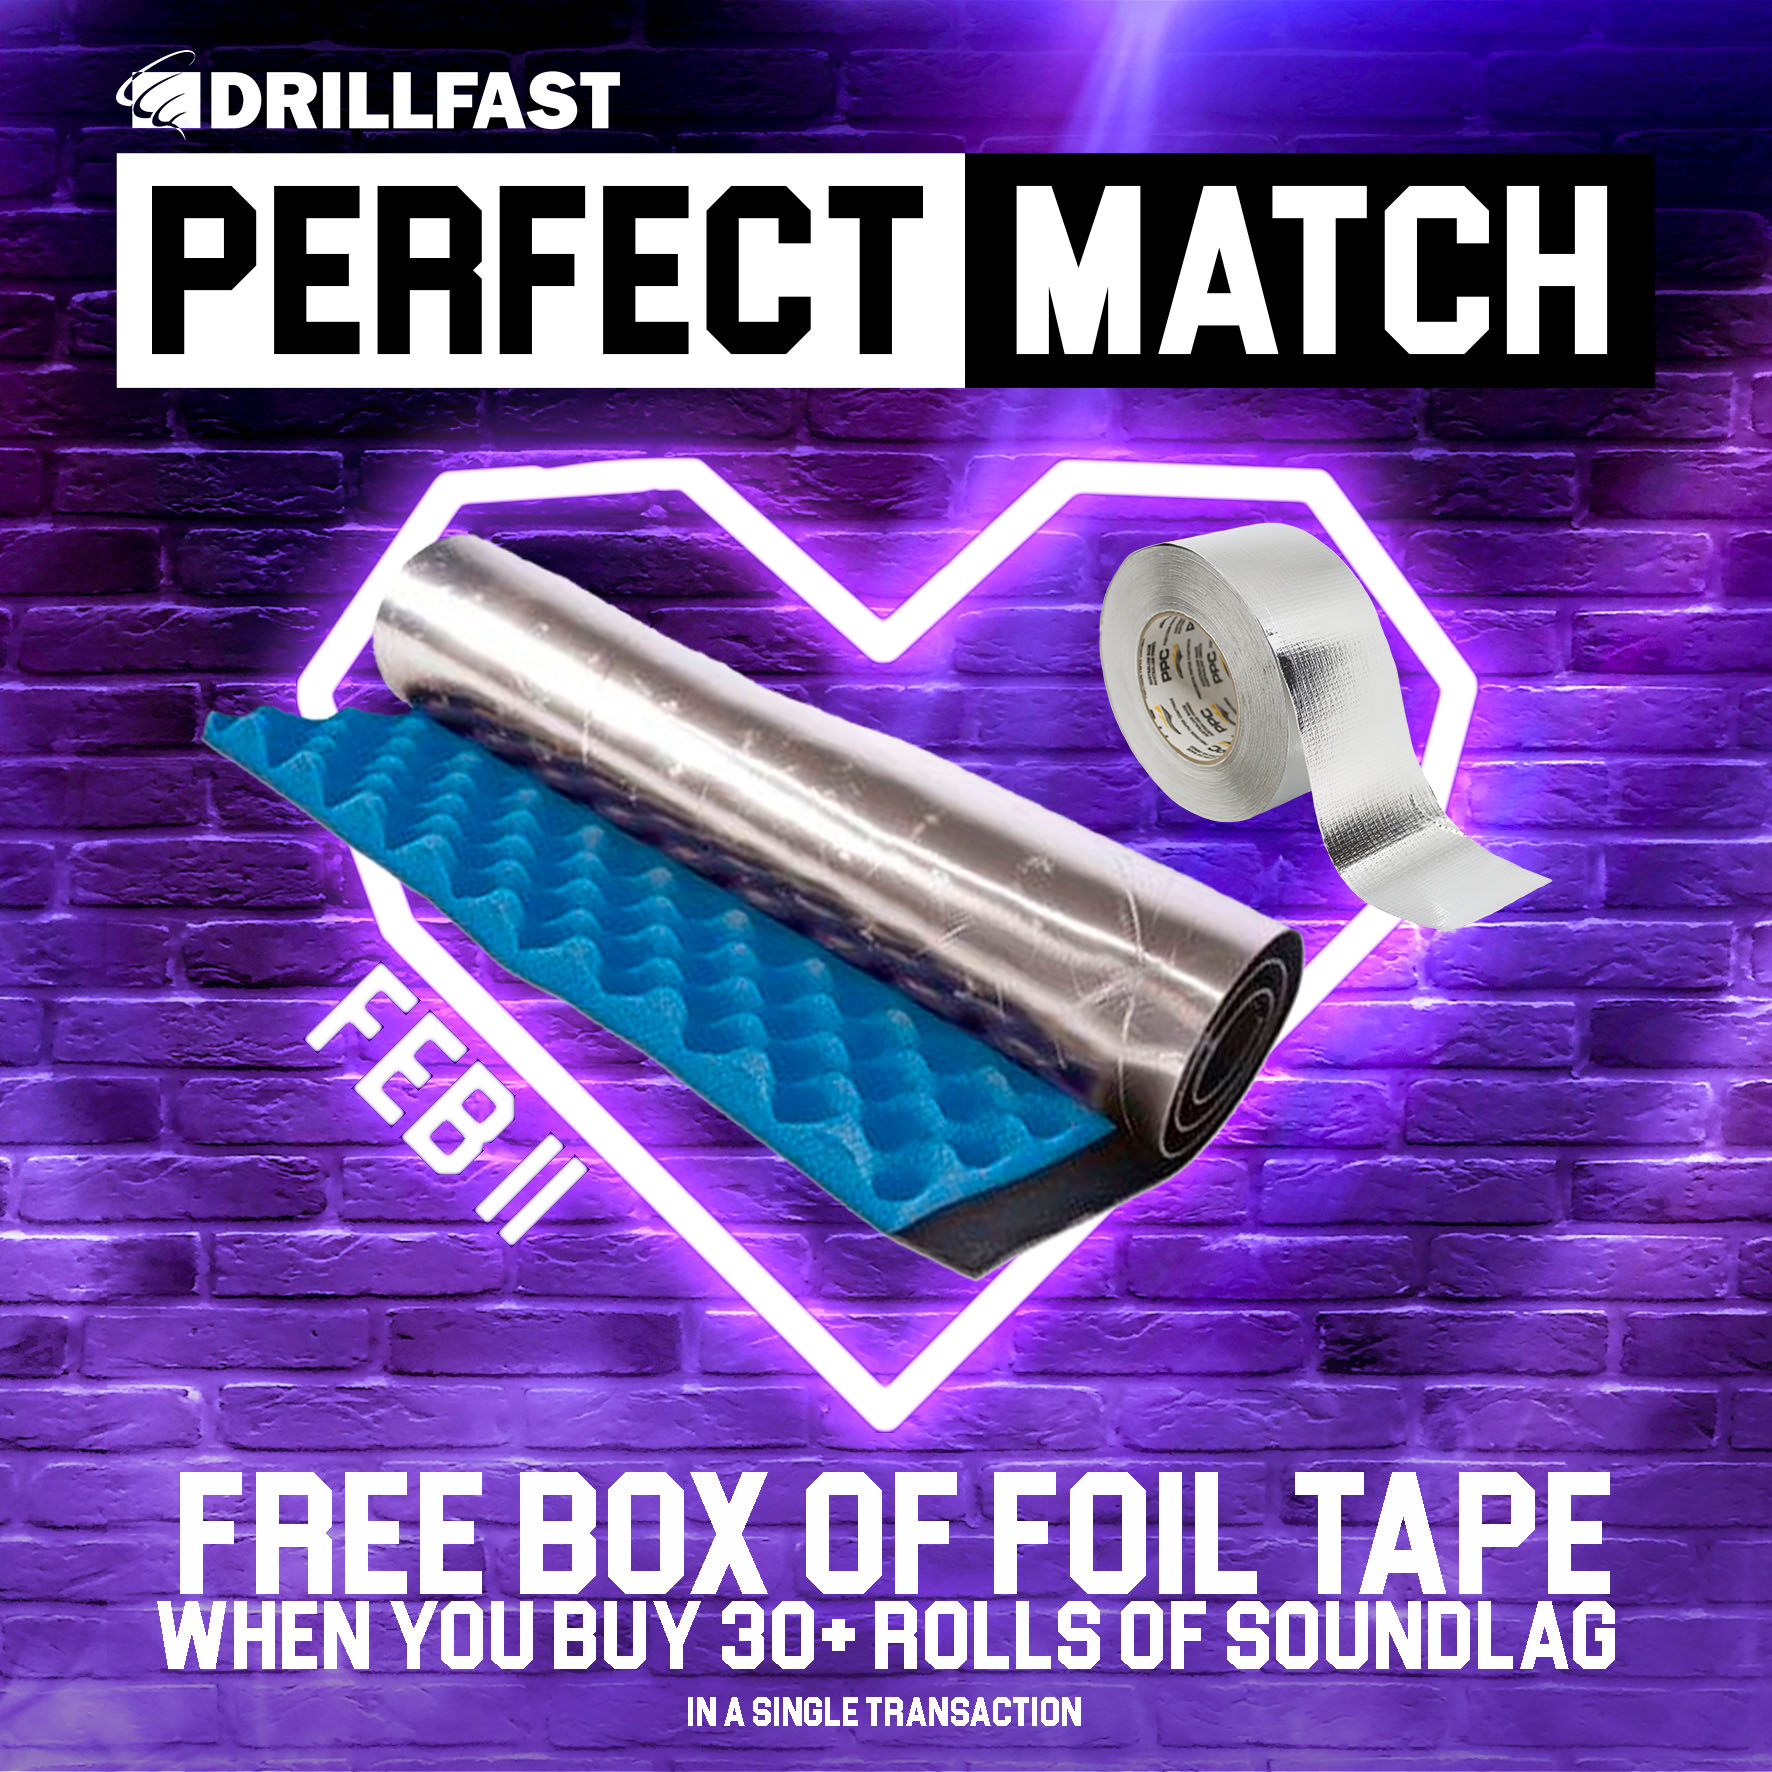 Perfect match Soundlag and foil tape